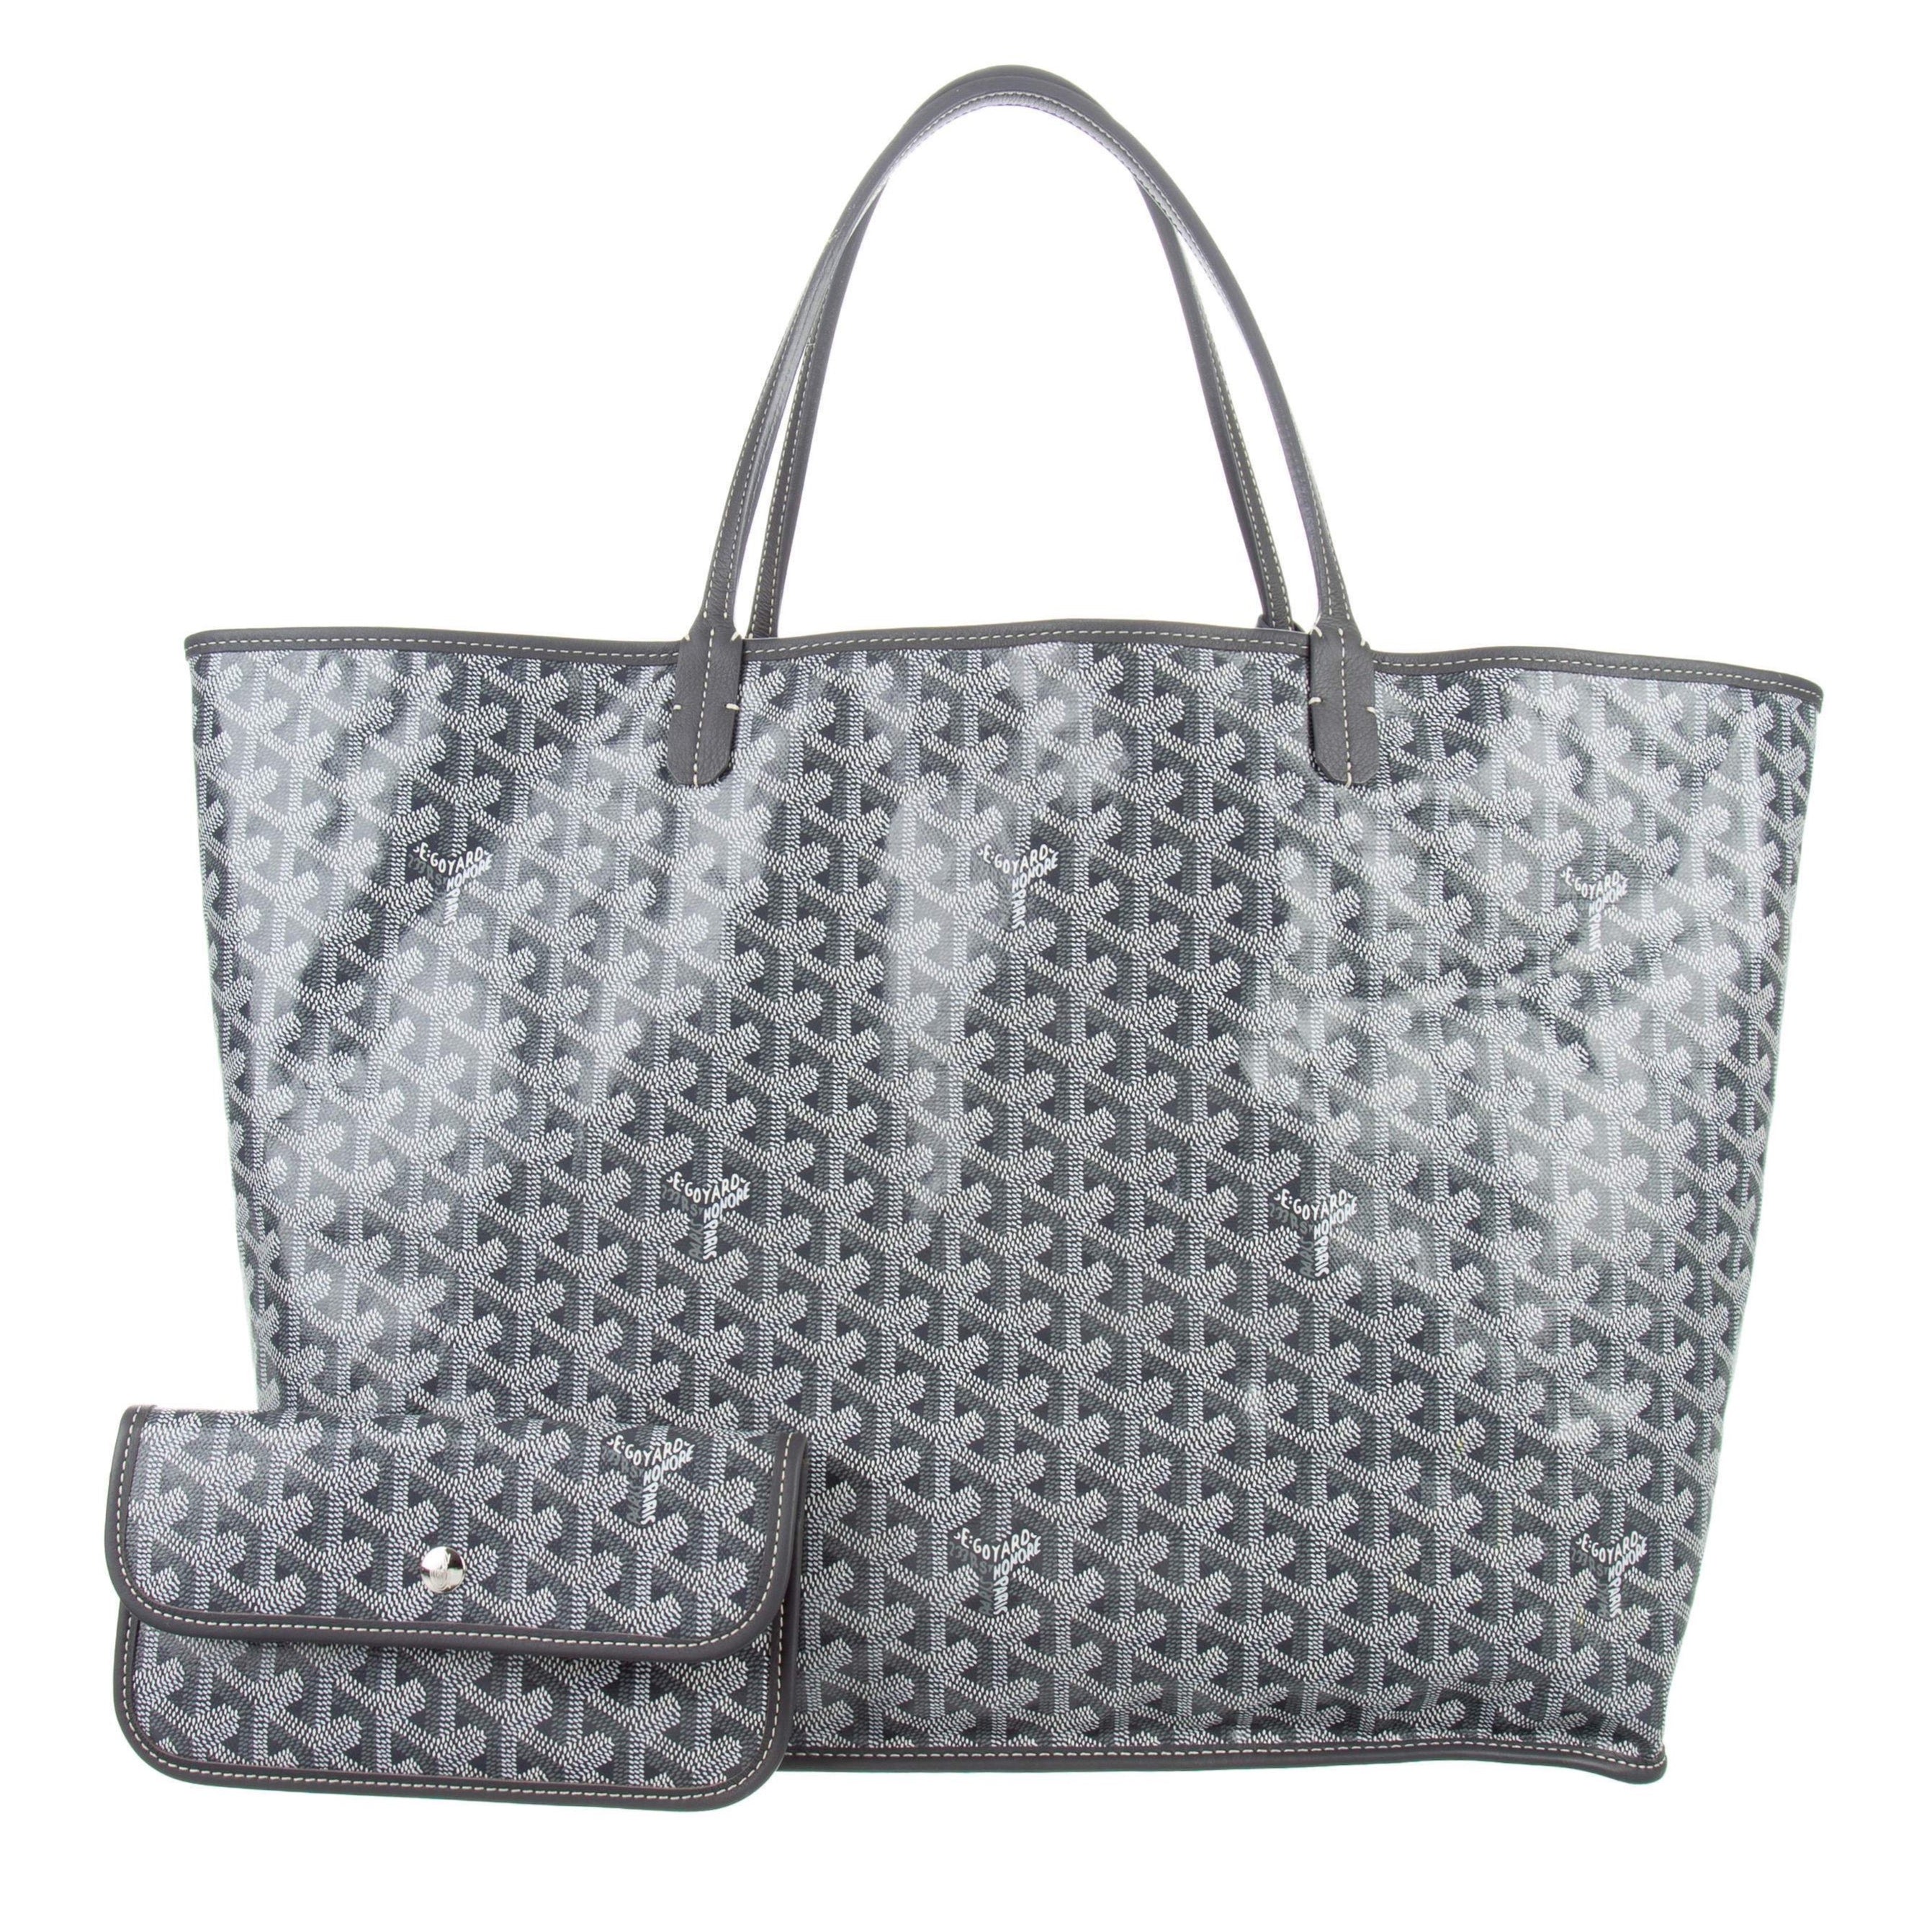 Goyard Anjou GM tote in special colors – hey it's personal shopper london